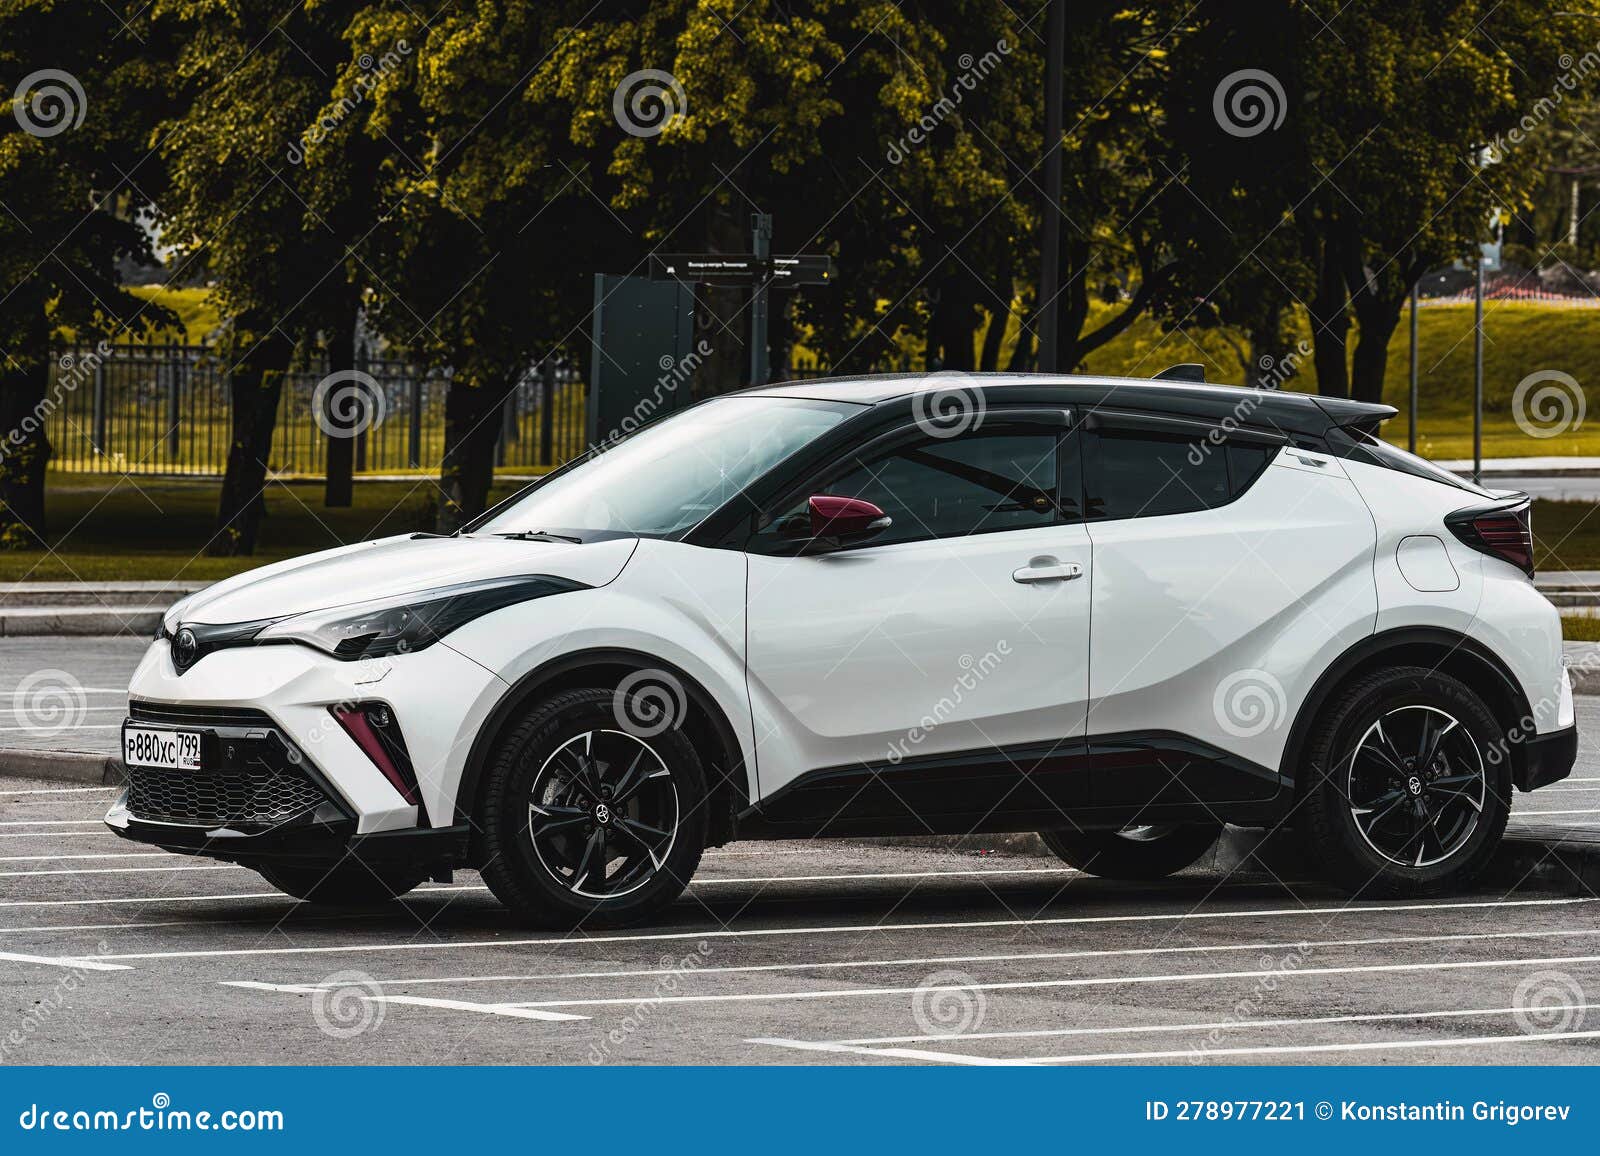 https://thumbs.dreamstime.com/z/toyota-c-hr-hybrid-compact-car-parked-city-parking-lot-moscow-russia-may-278977221.jpg